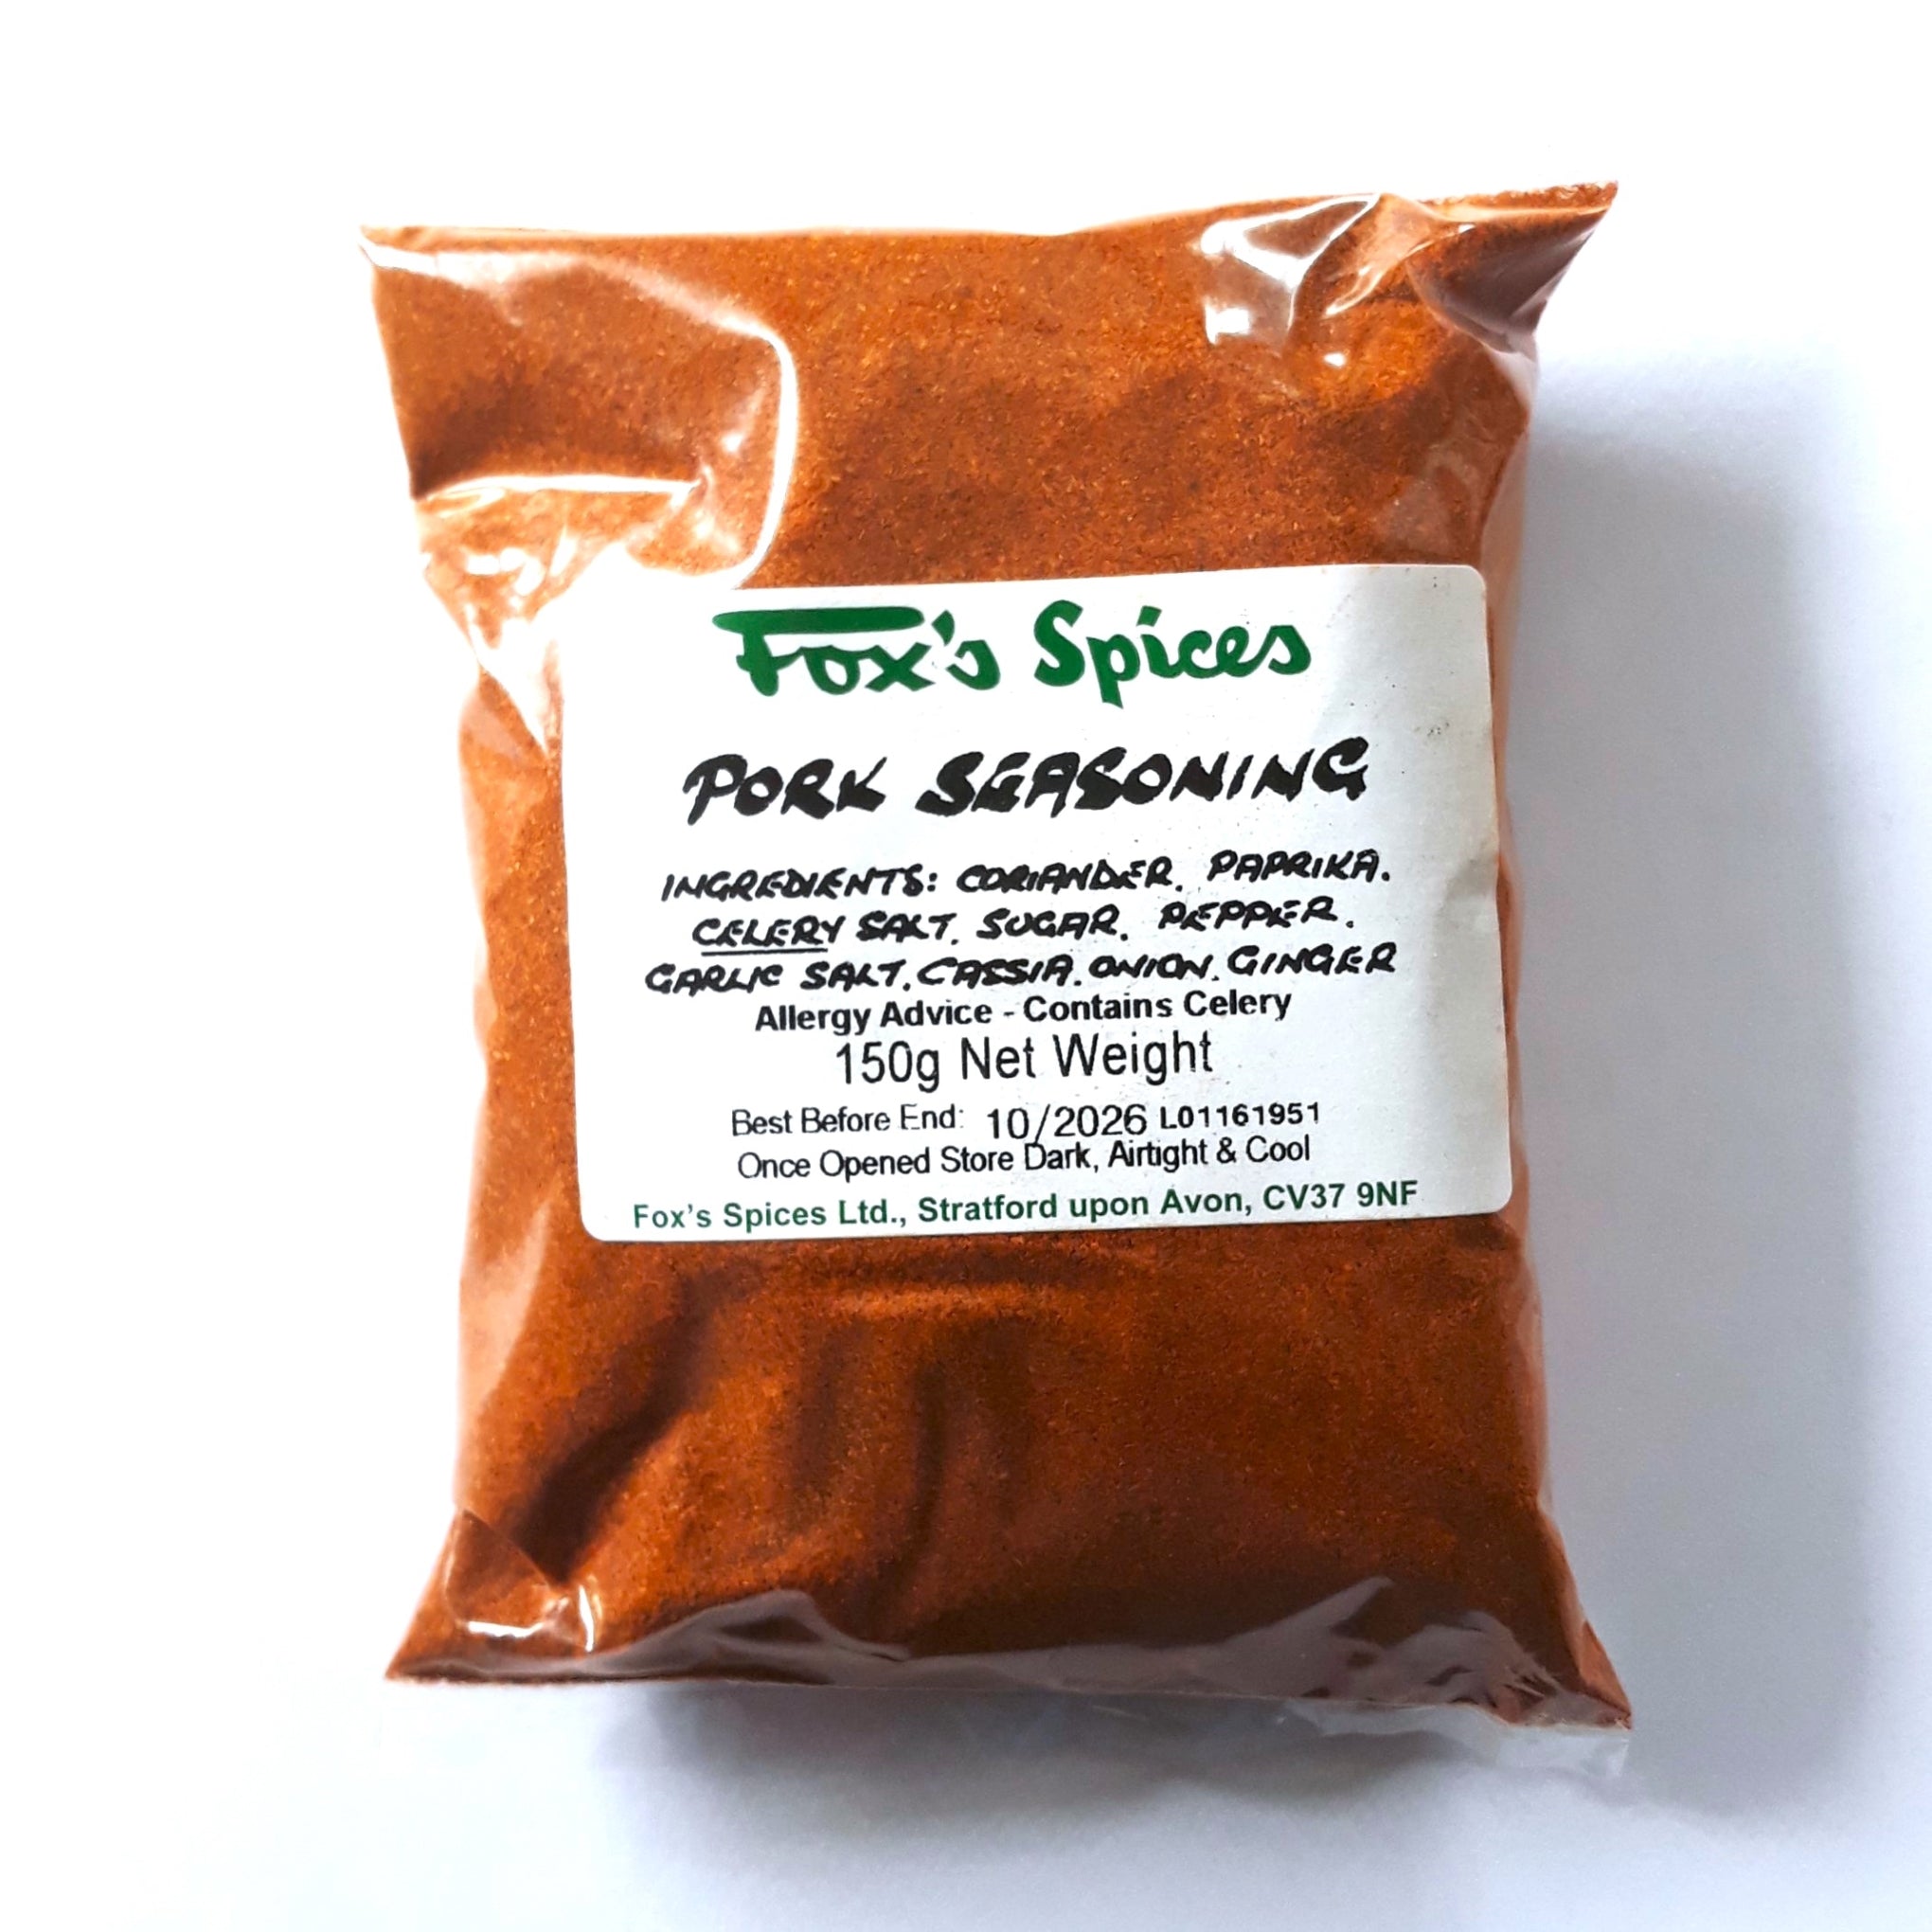 Fox's Spices Pork seasoning sold in 150g bags.